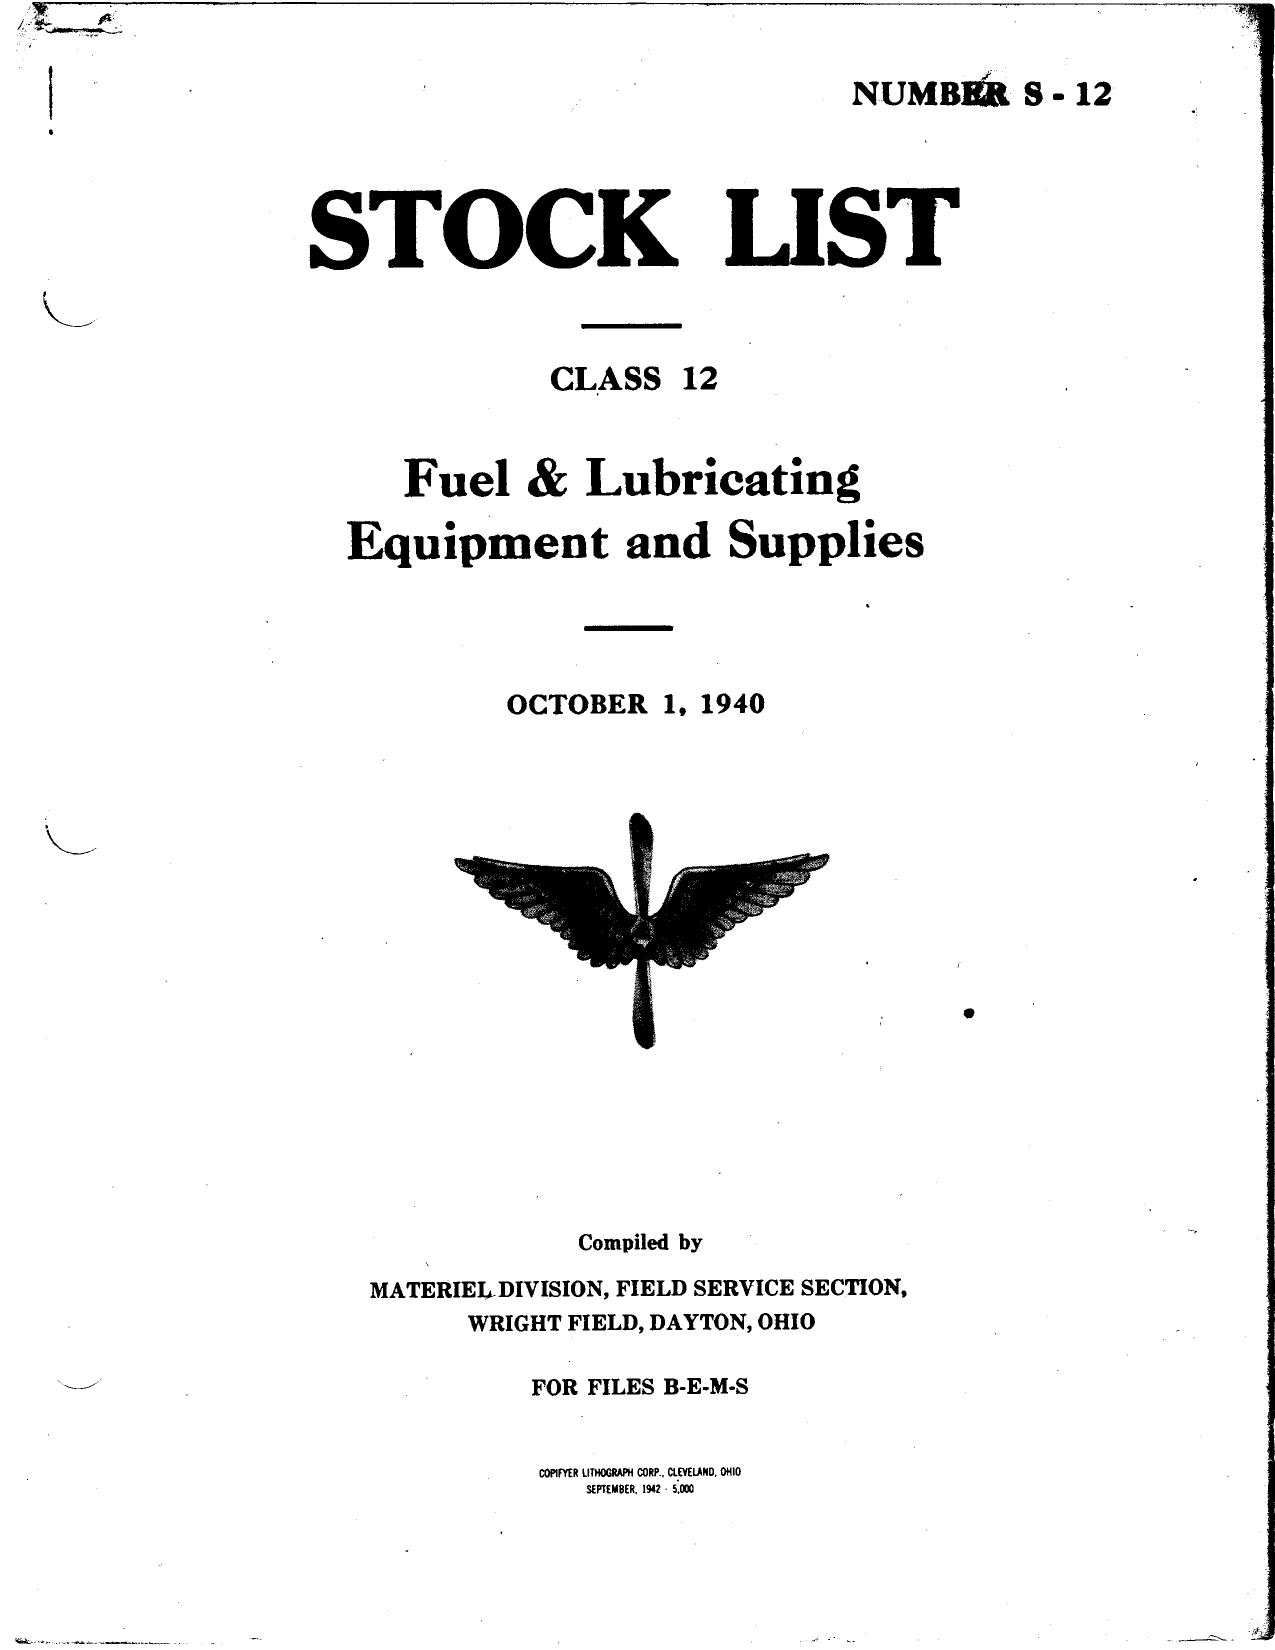 Sample page 1 from AirCorps Library document: Stock List for Fuel & Lubricating Equipment and Supplies